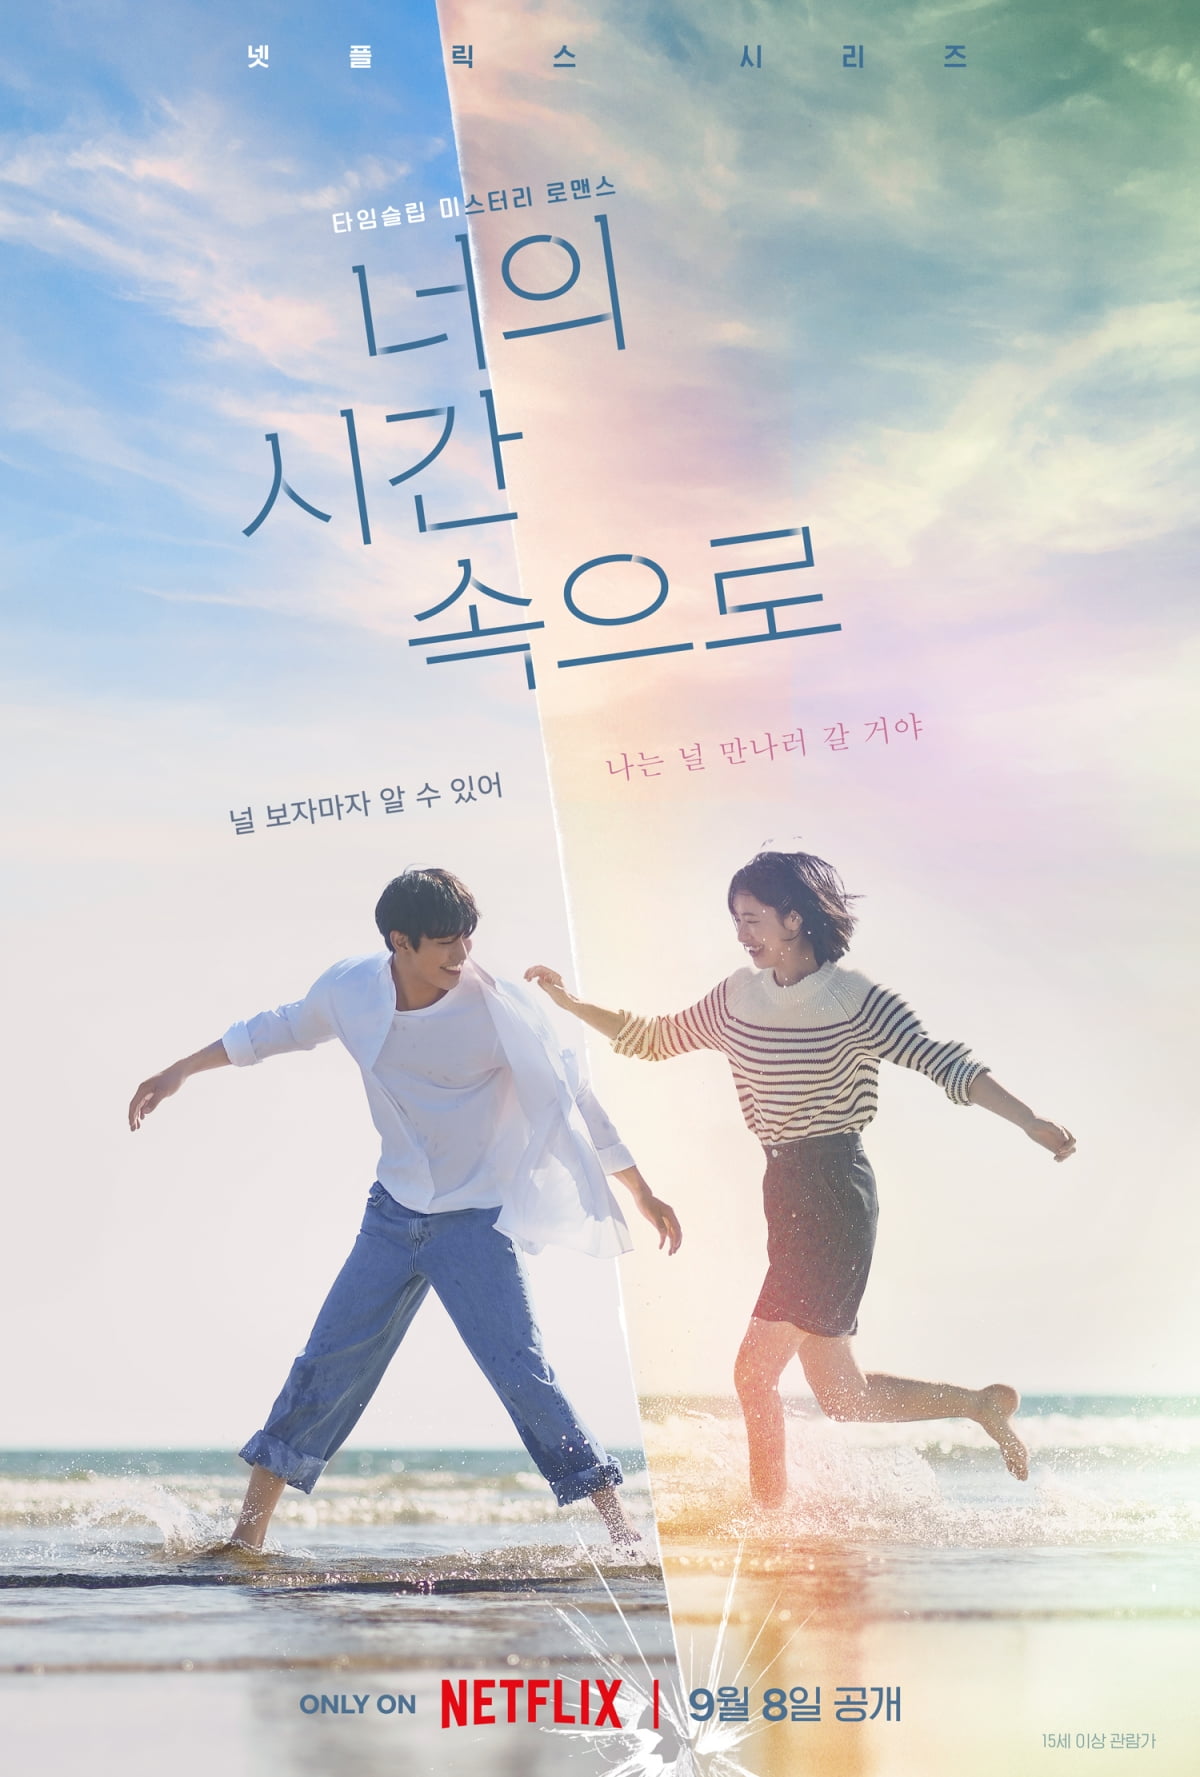 Ahn Hyo-seop, Jeon Yeo-bin, and Kang Hoon 'Into Your Time' released on September 8